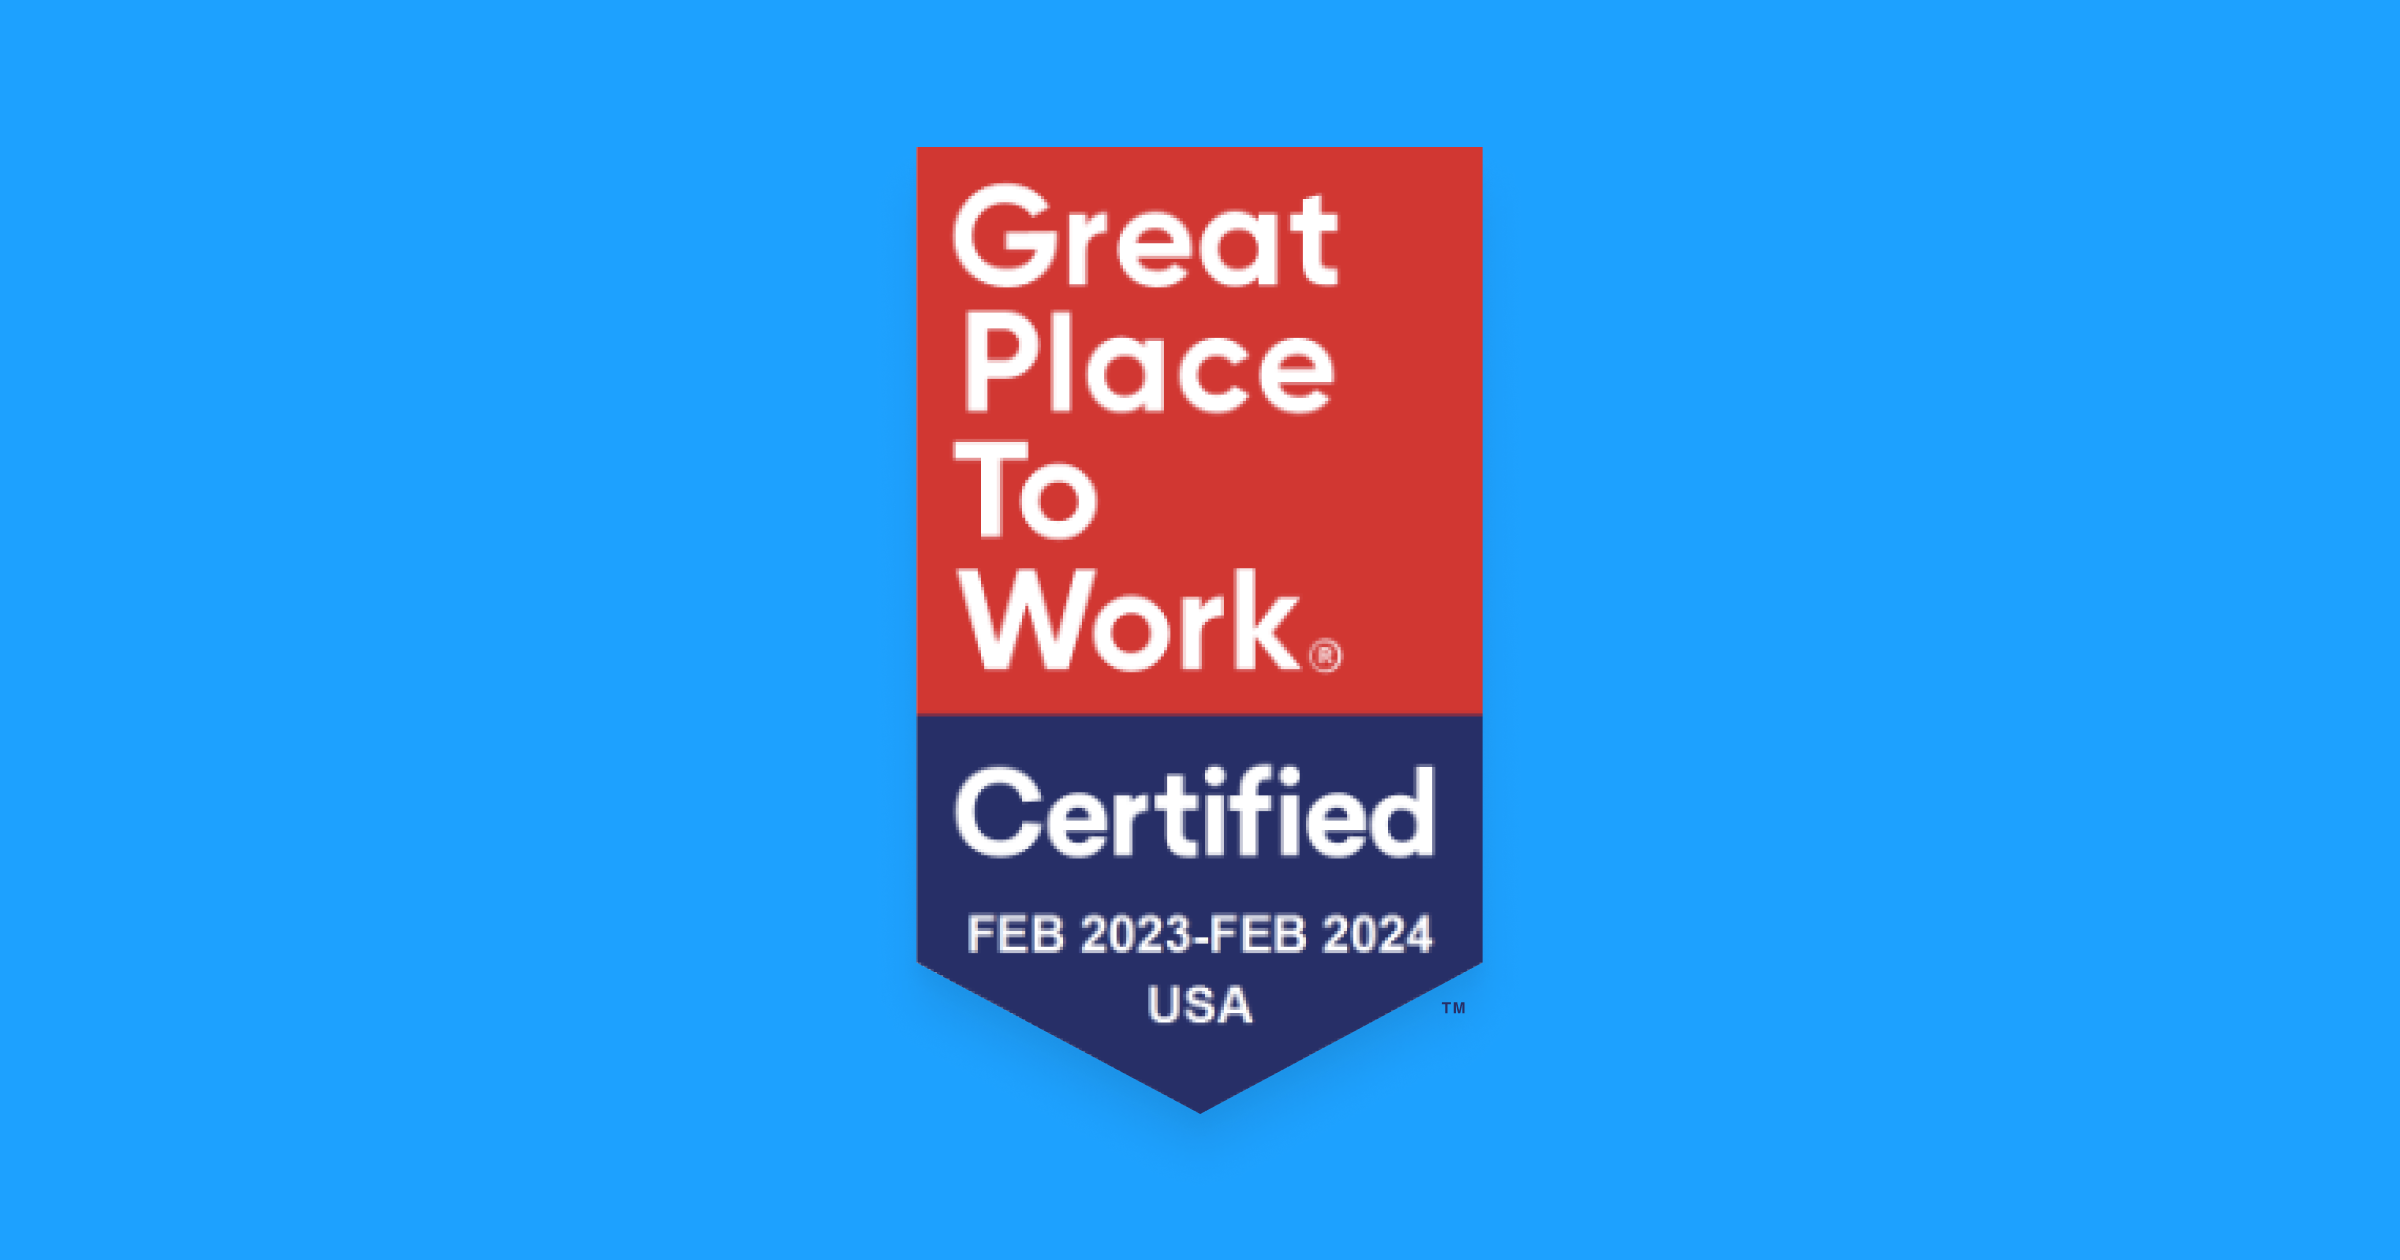 Great place to work award